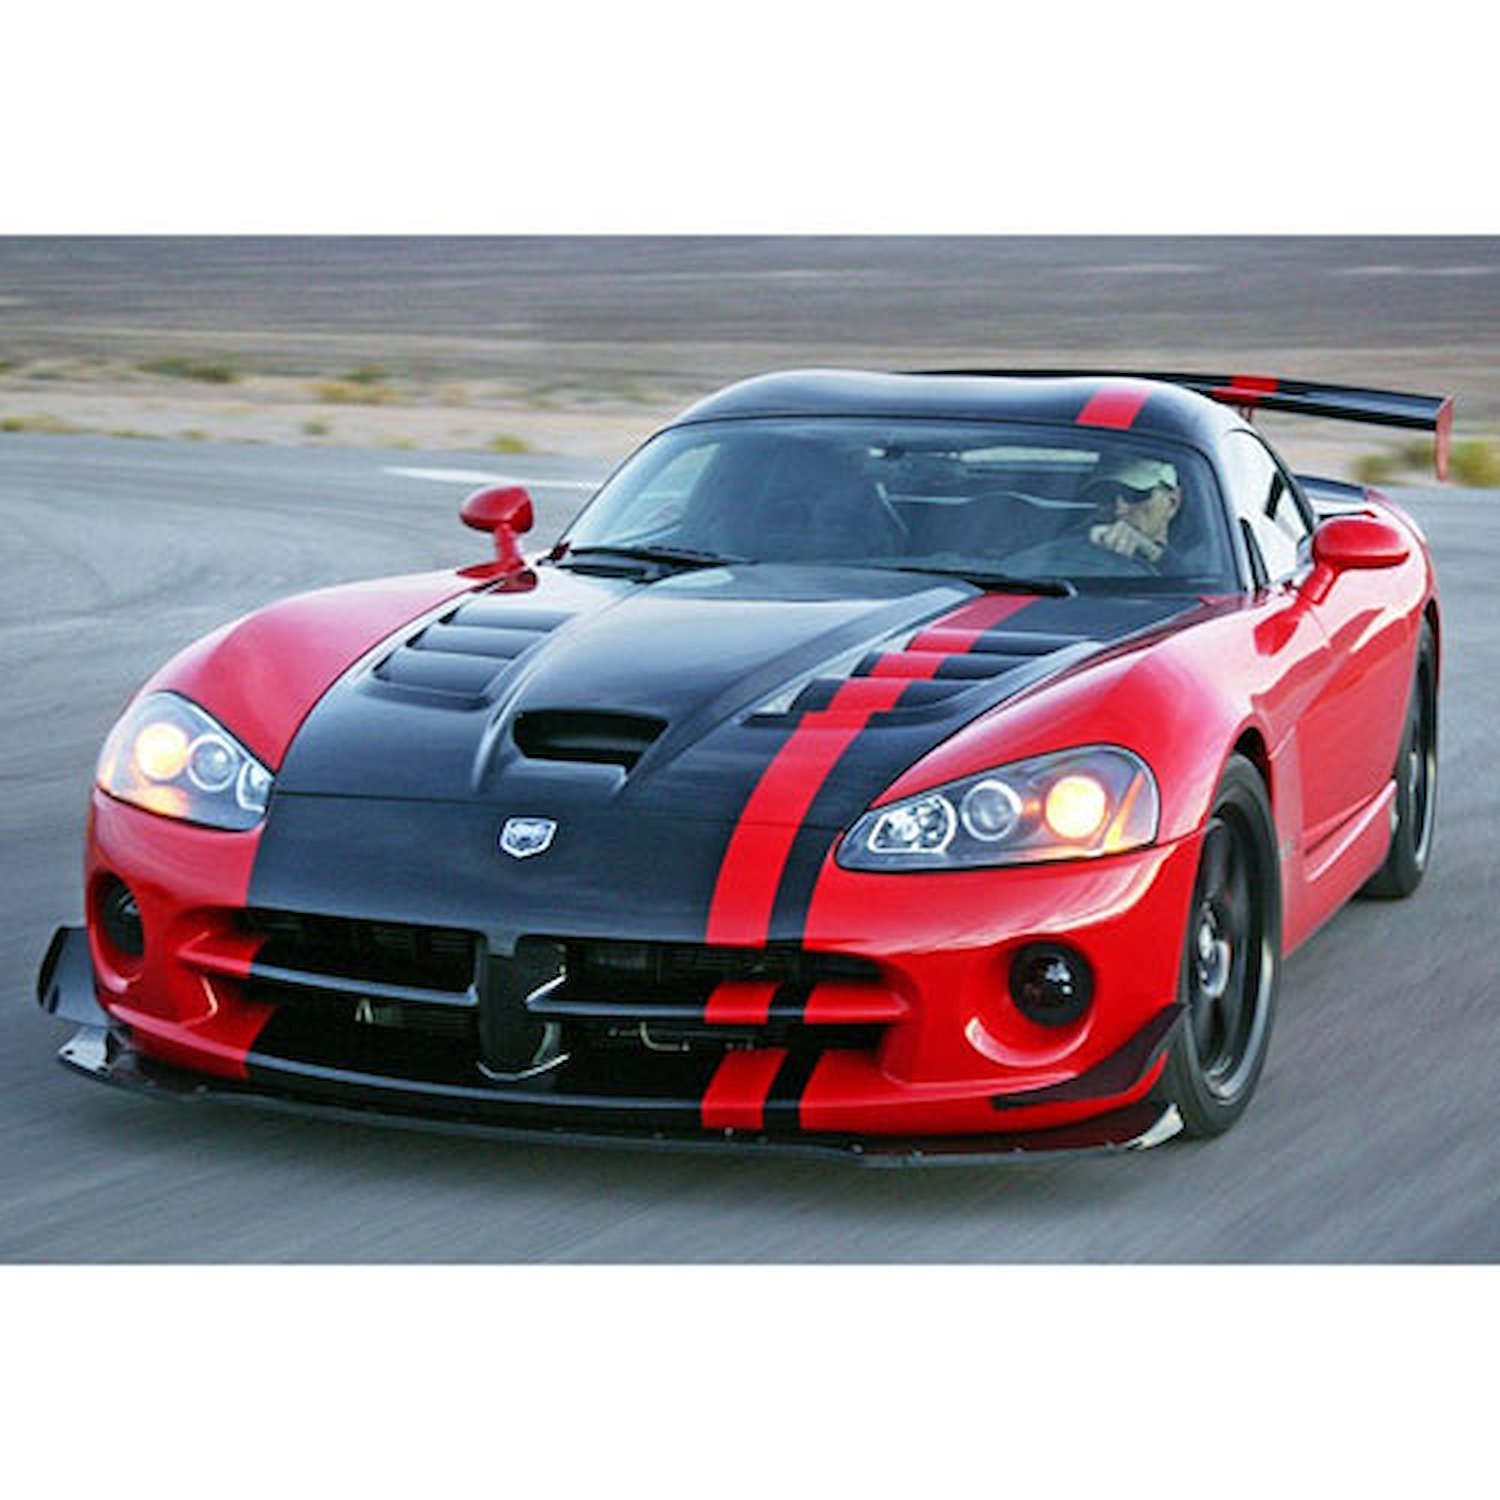 2006-2010 Dodge Viper SRT10 ACR Coupe Aero Package with Carbon Fiber Wing